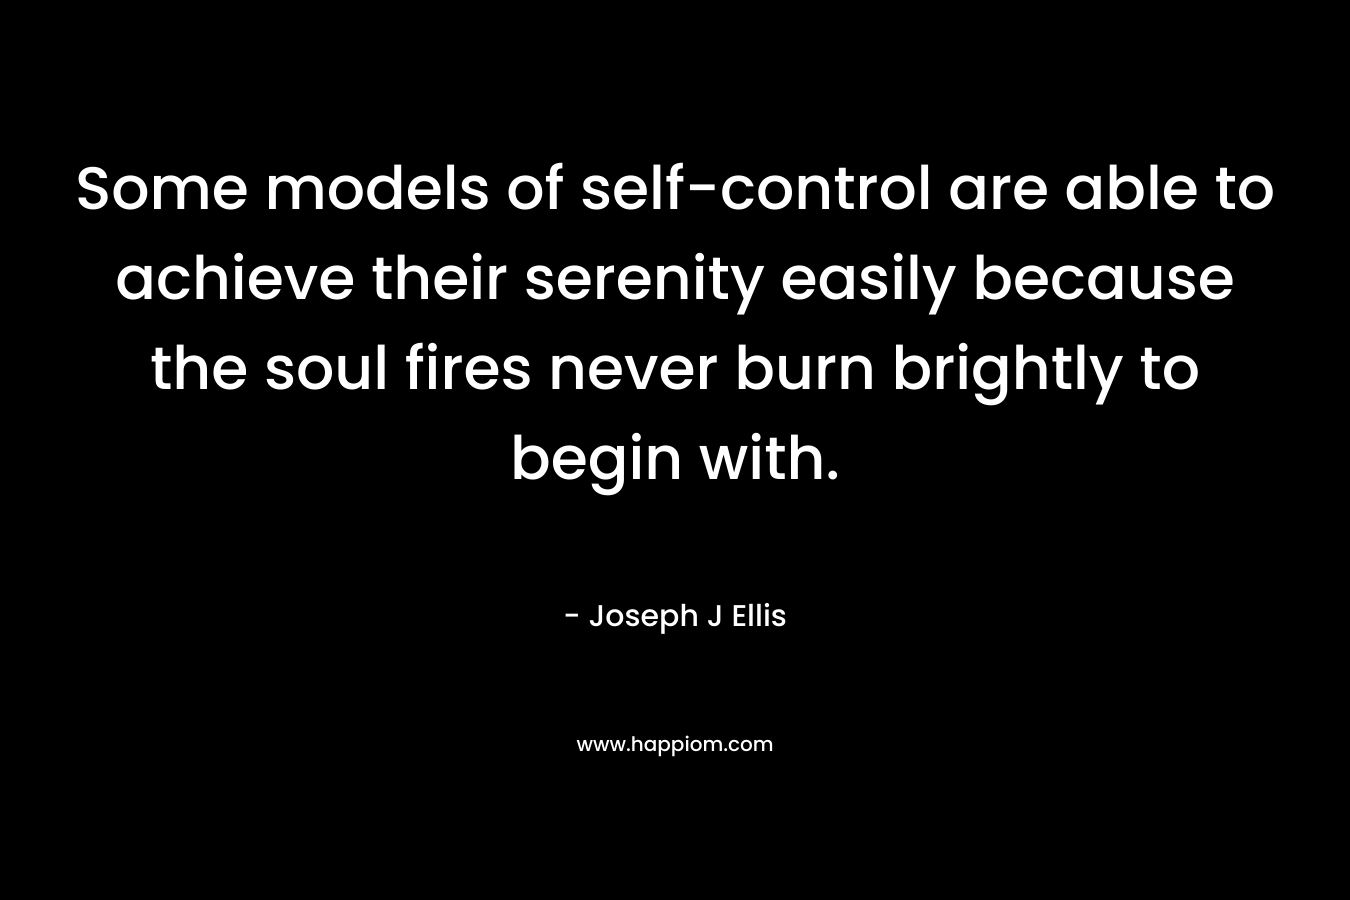 Some models of self-control are able to achieve their serenity easily because the soul fires never burn brightly to begin with.